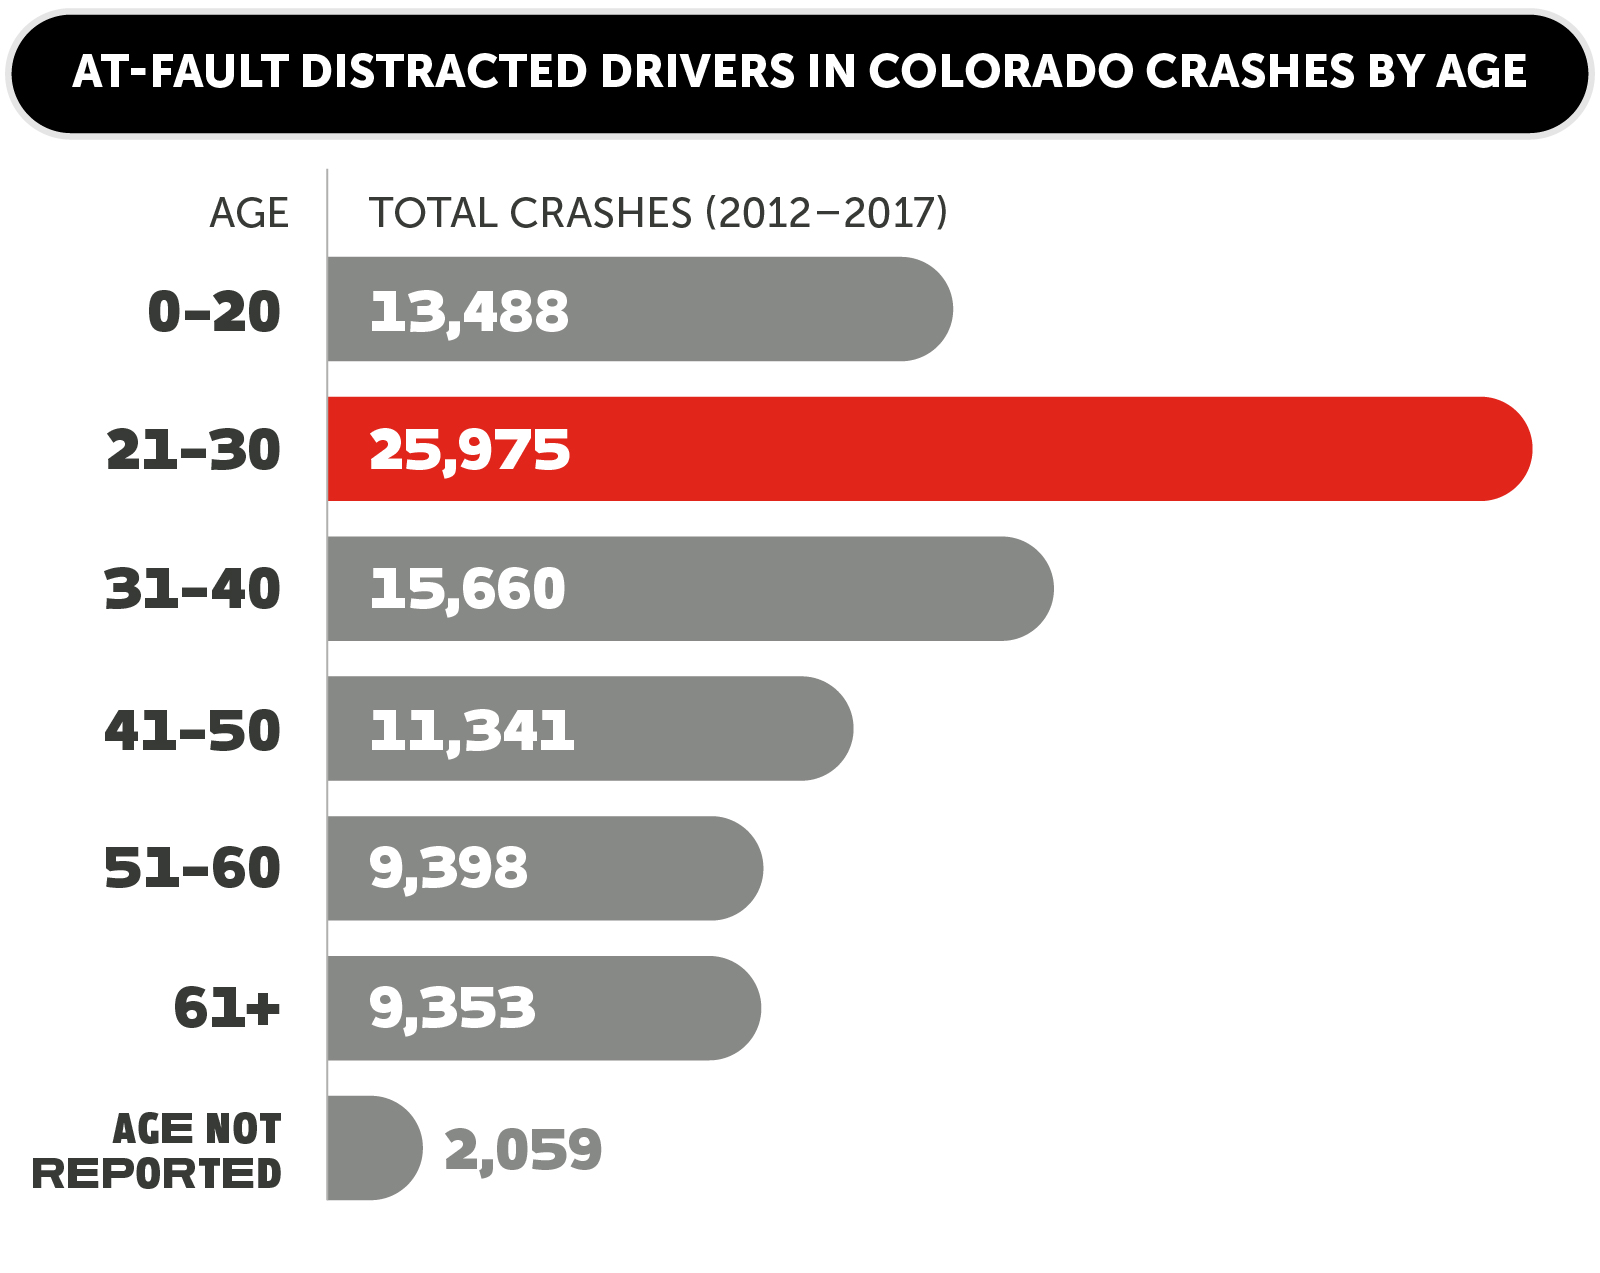 At-fault distracted drivers in Colorado - Crashes by age 2012 to 2017 detail image